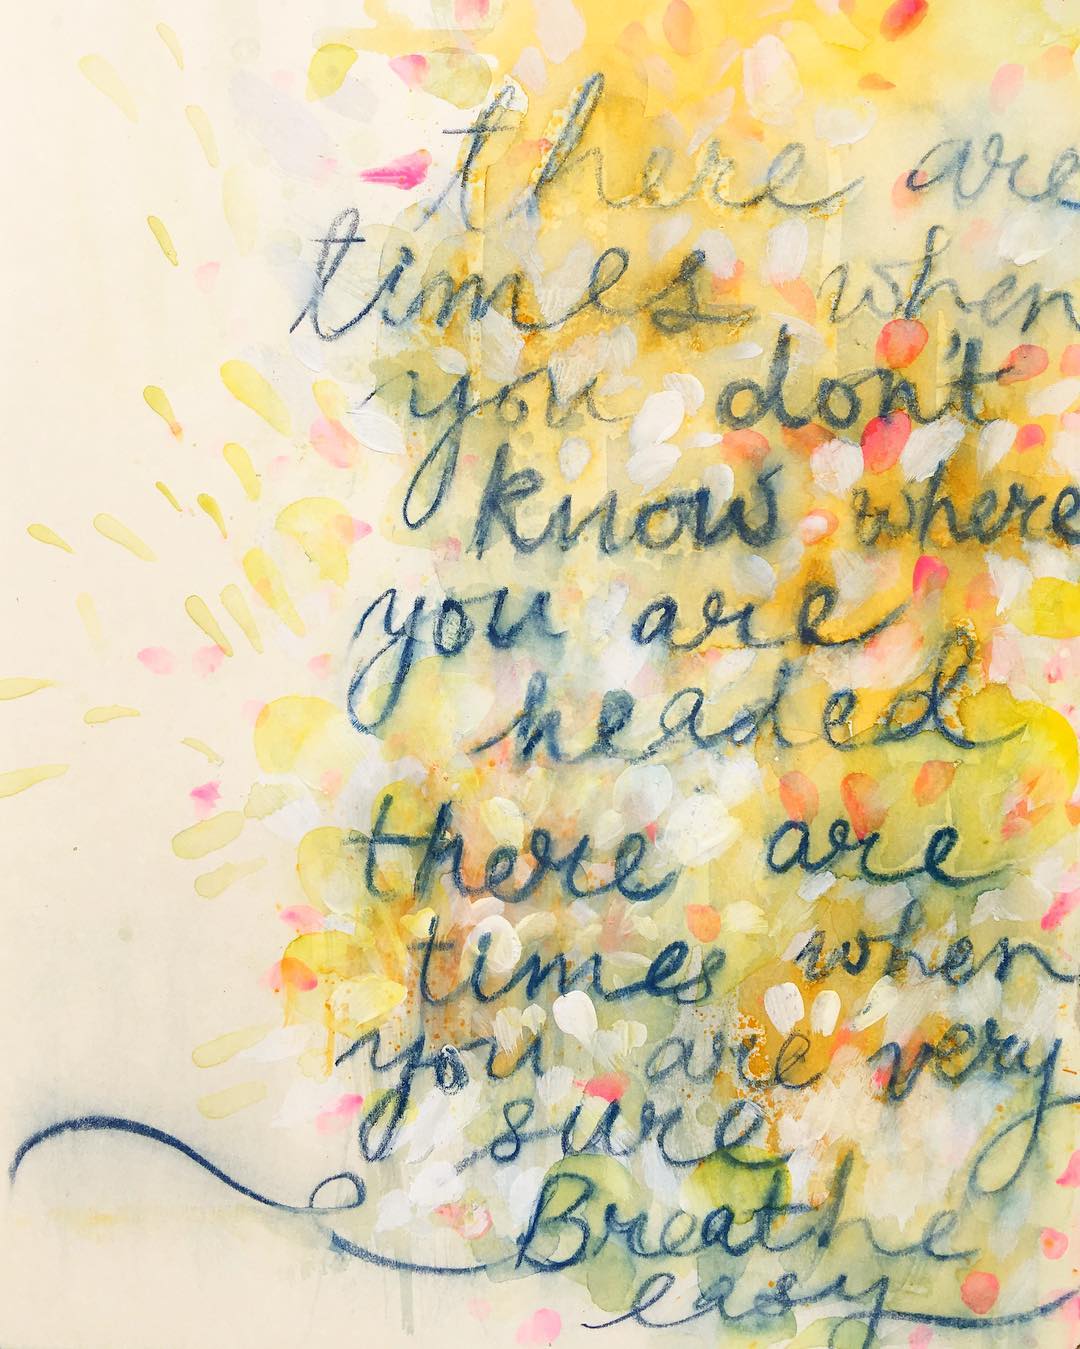 Daily Art Journaling ~ Day 68
Breathe easy...